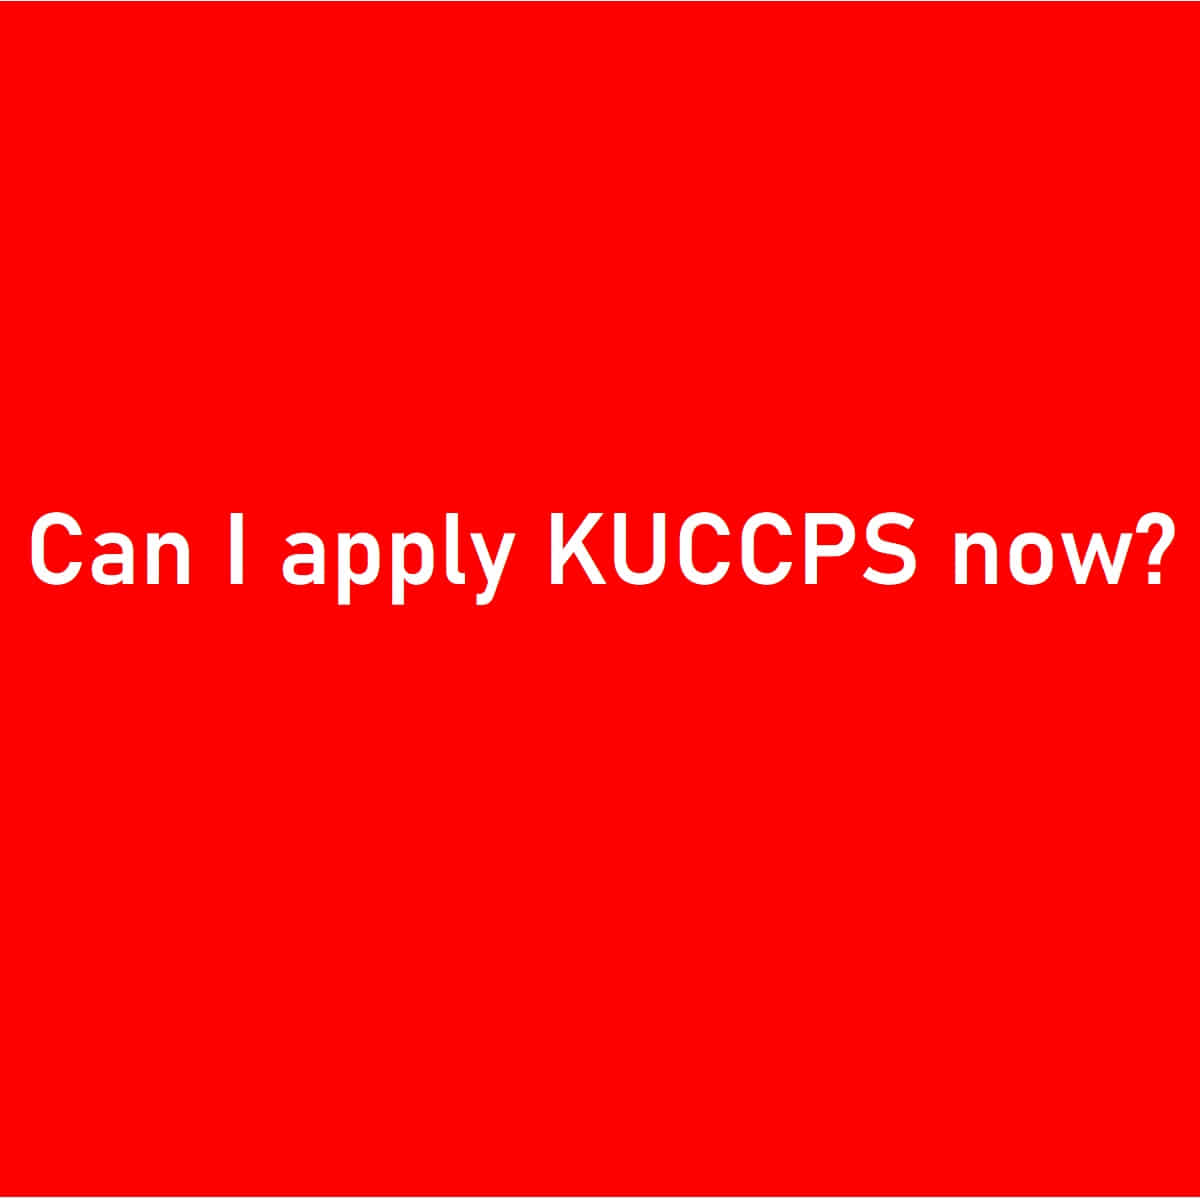 Can I apply KUCCPS now?